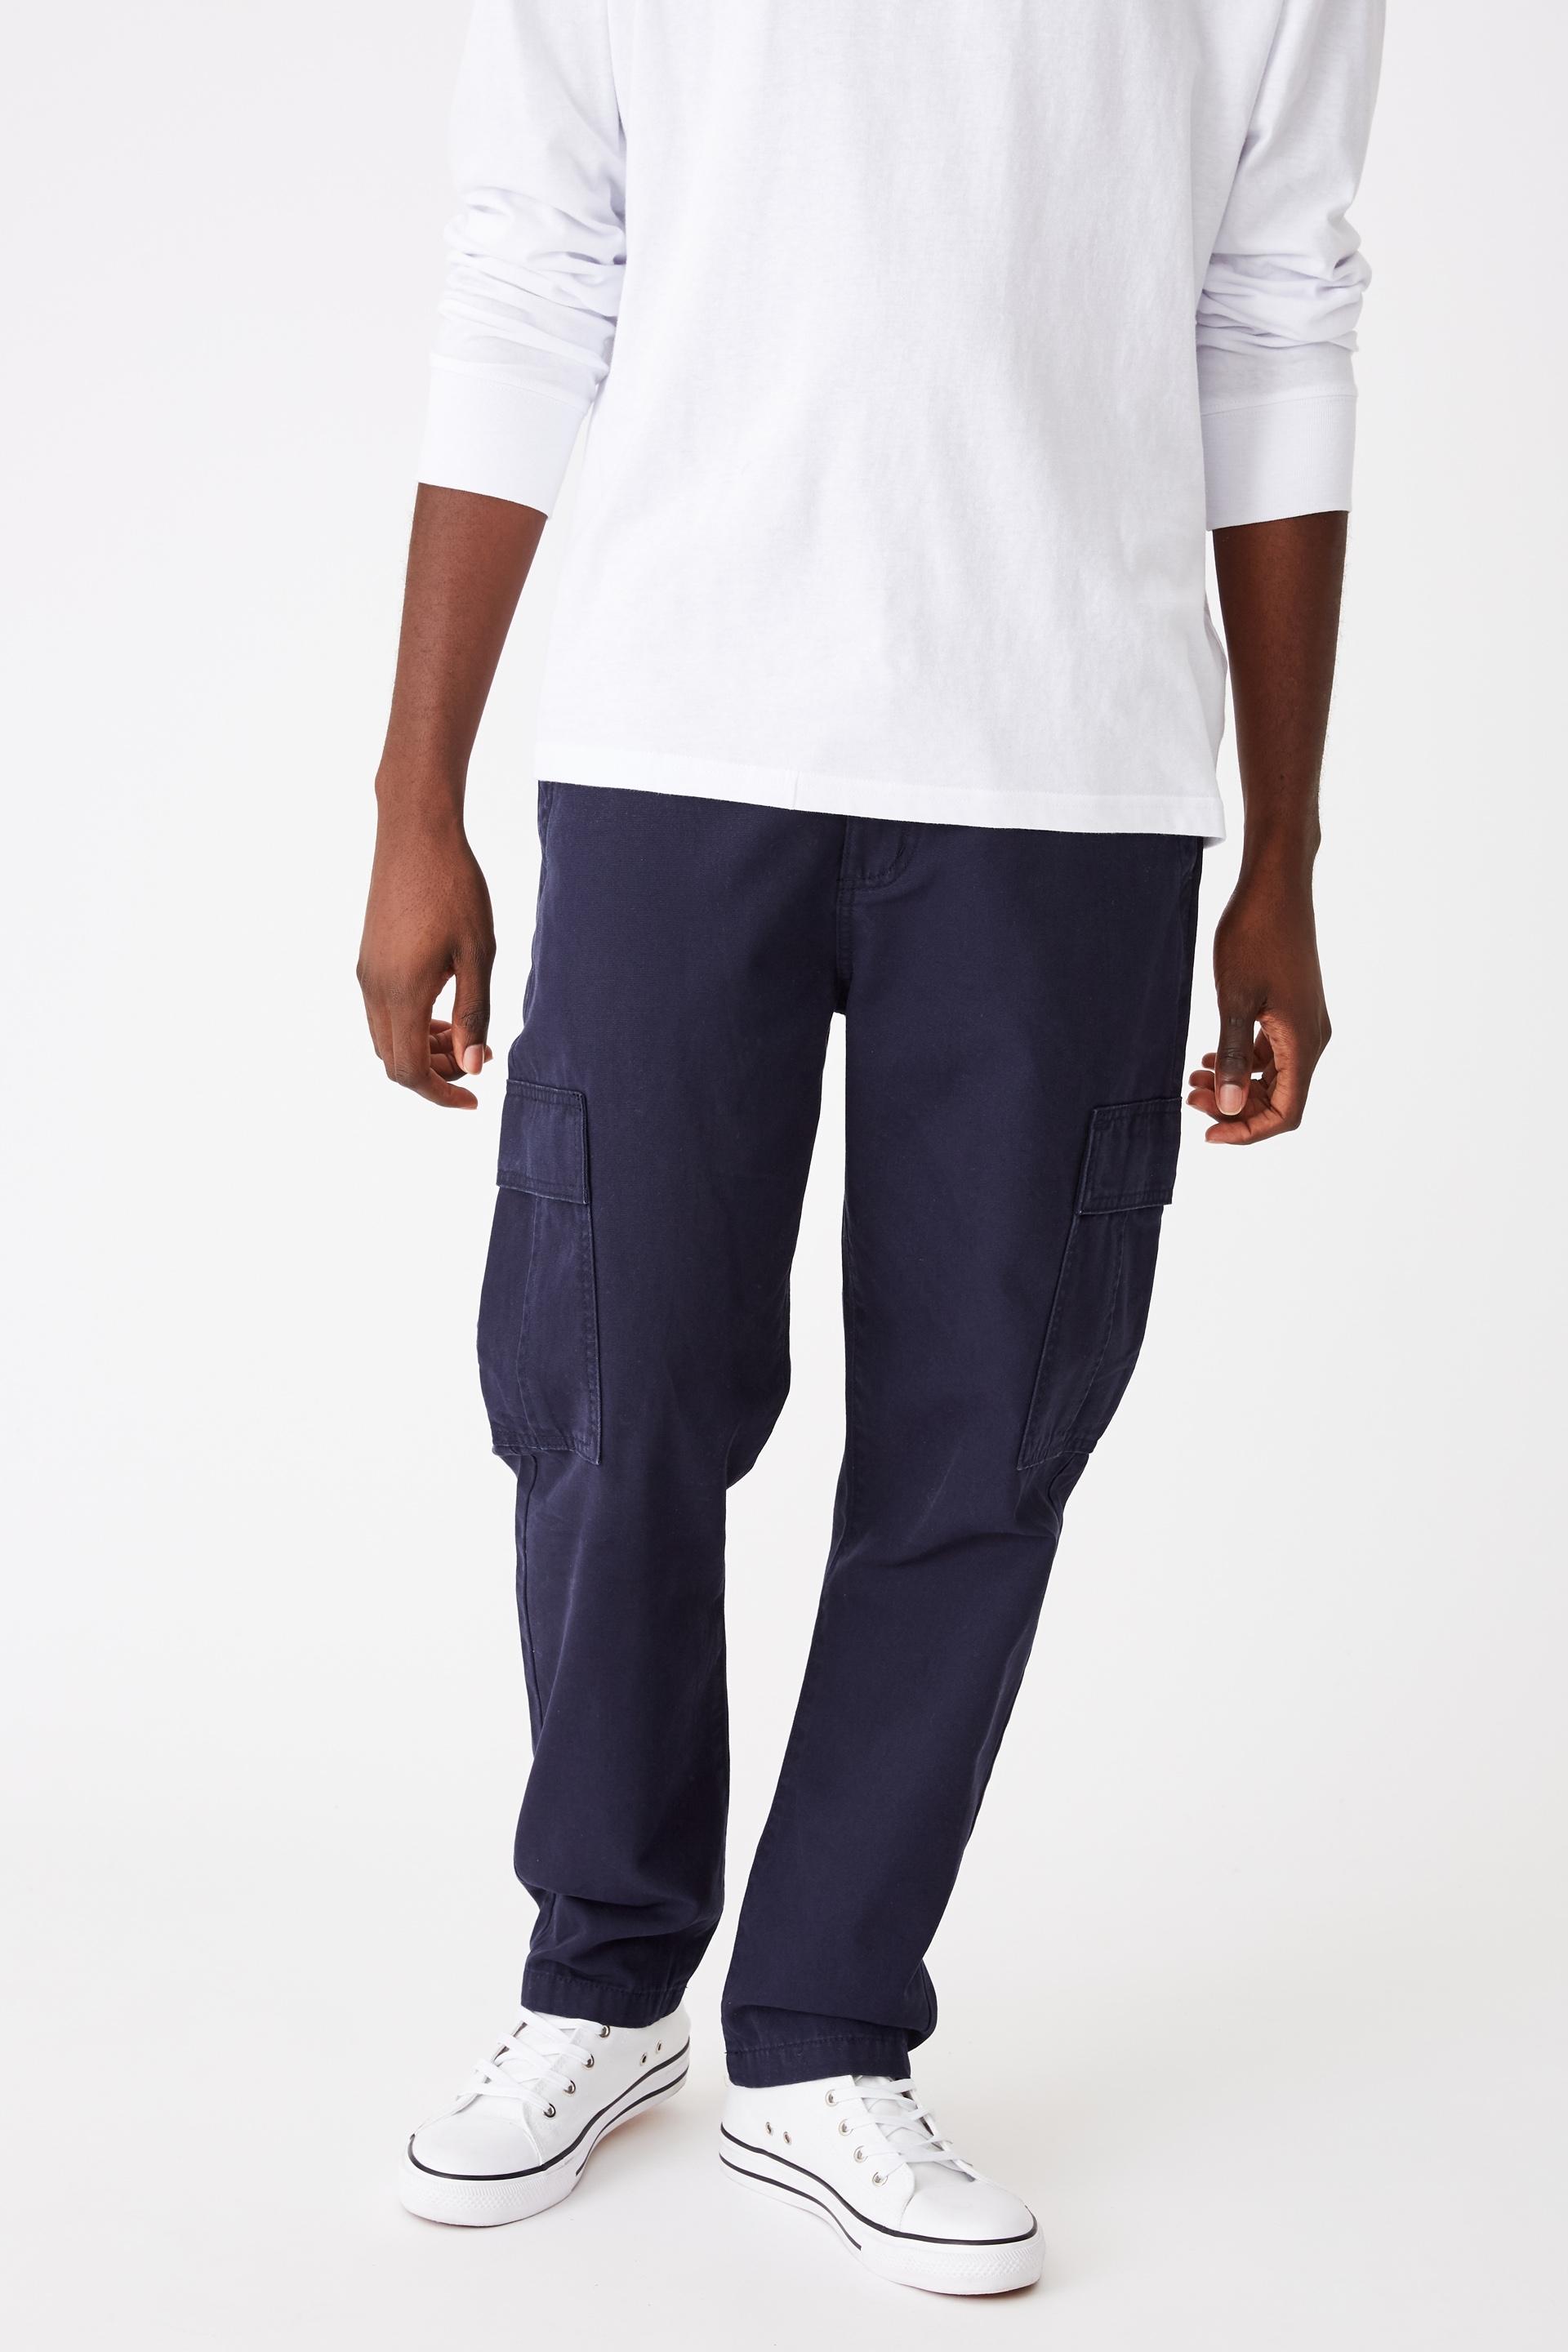 Cargo pant - navy Cotton On Pants & Chinos | Superbalist.com